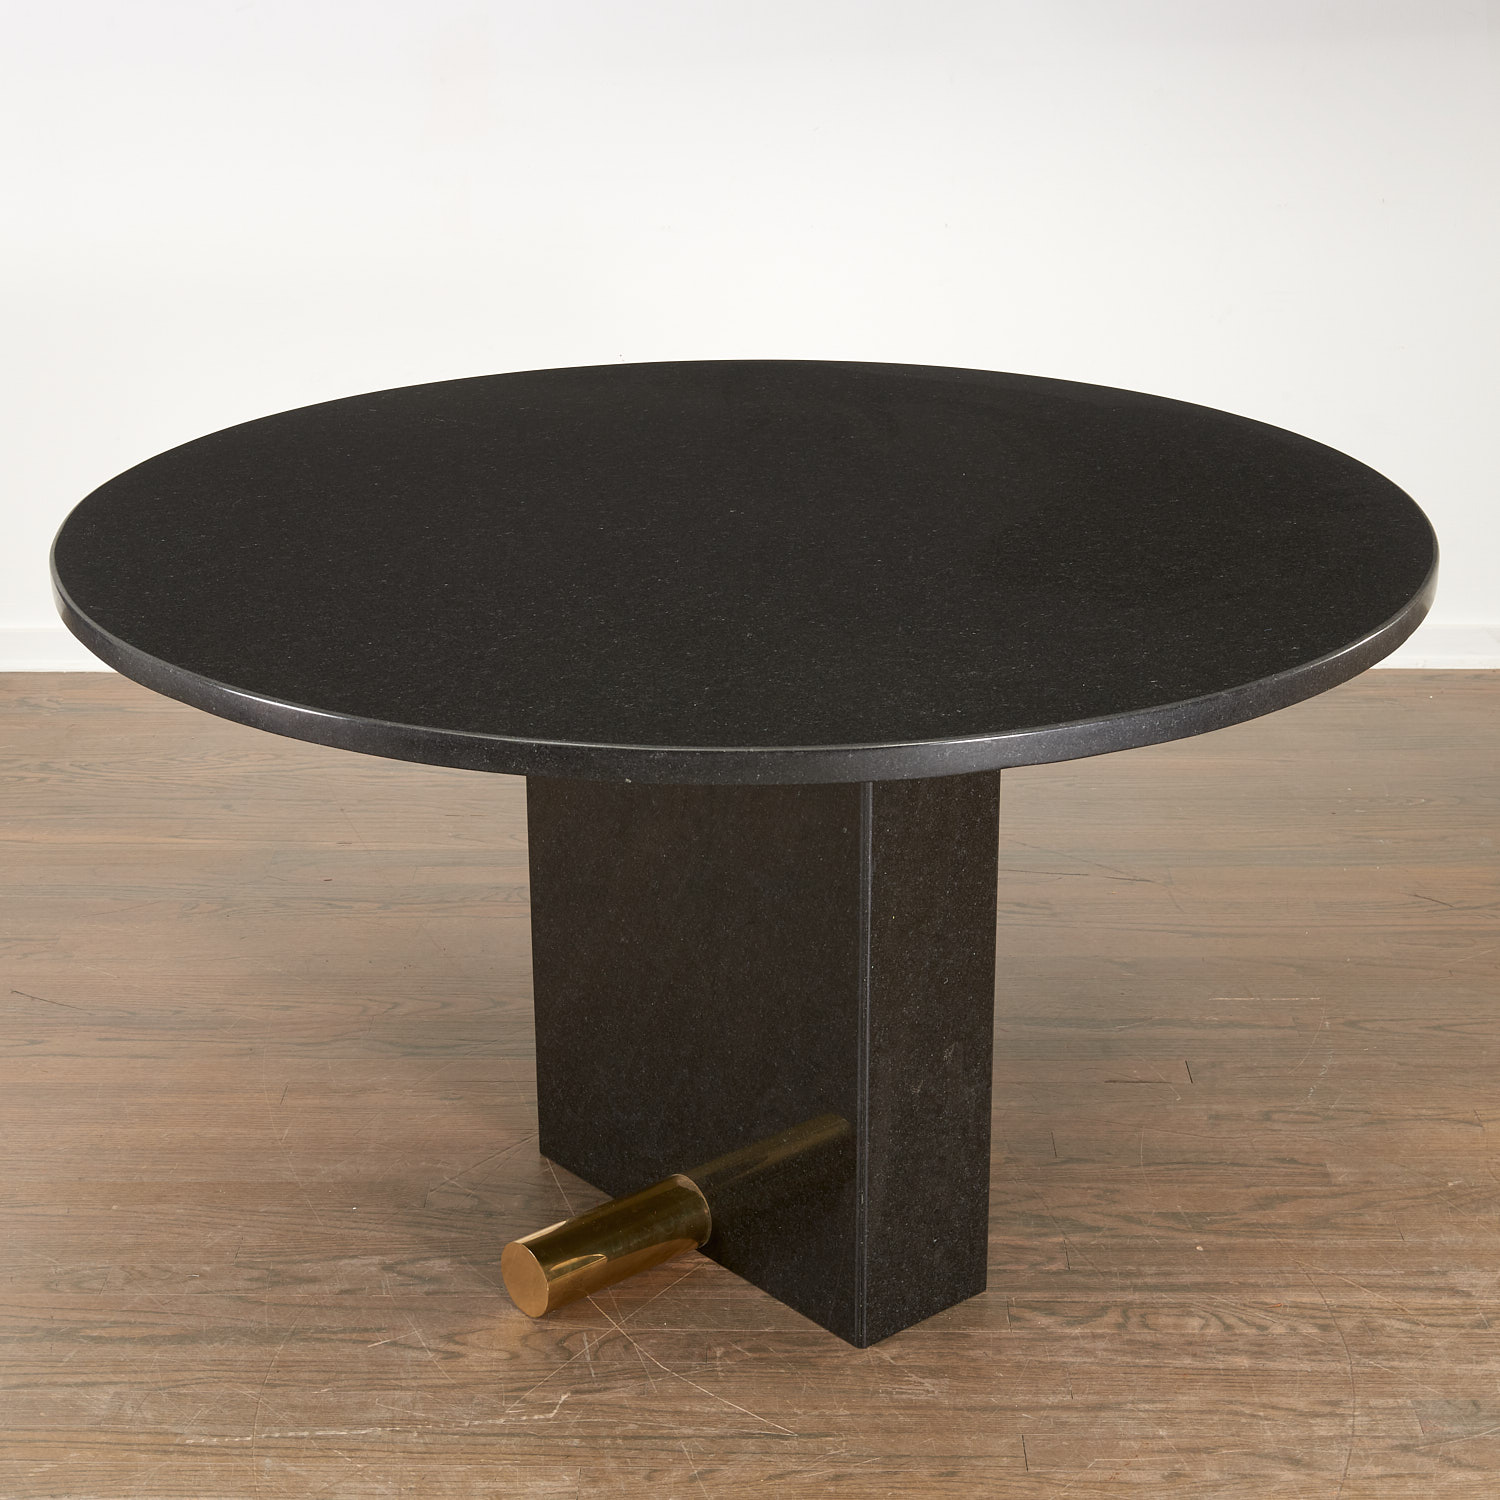 MODERN GRANITE DINING TABLE AFTER 362763